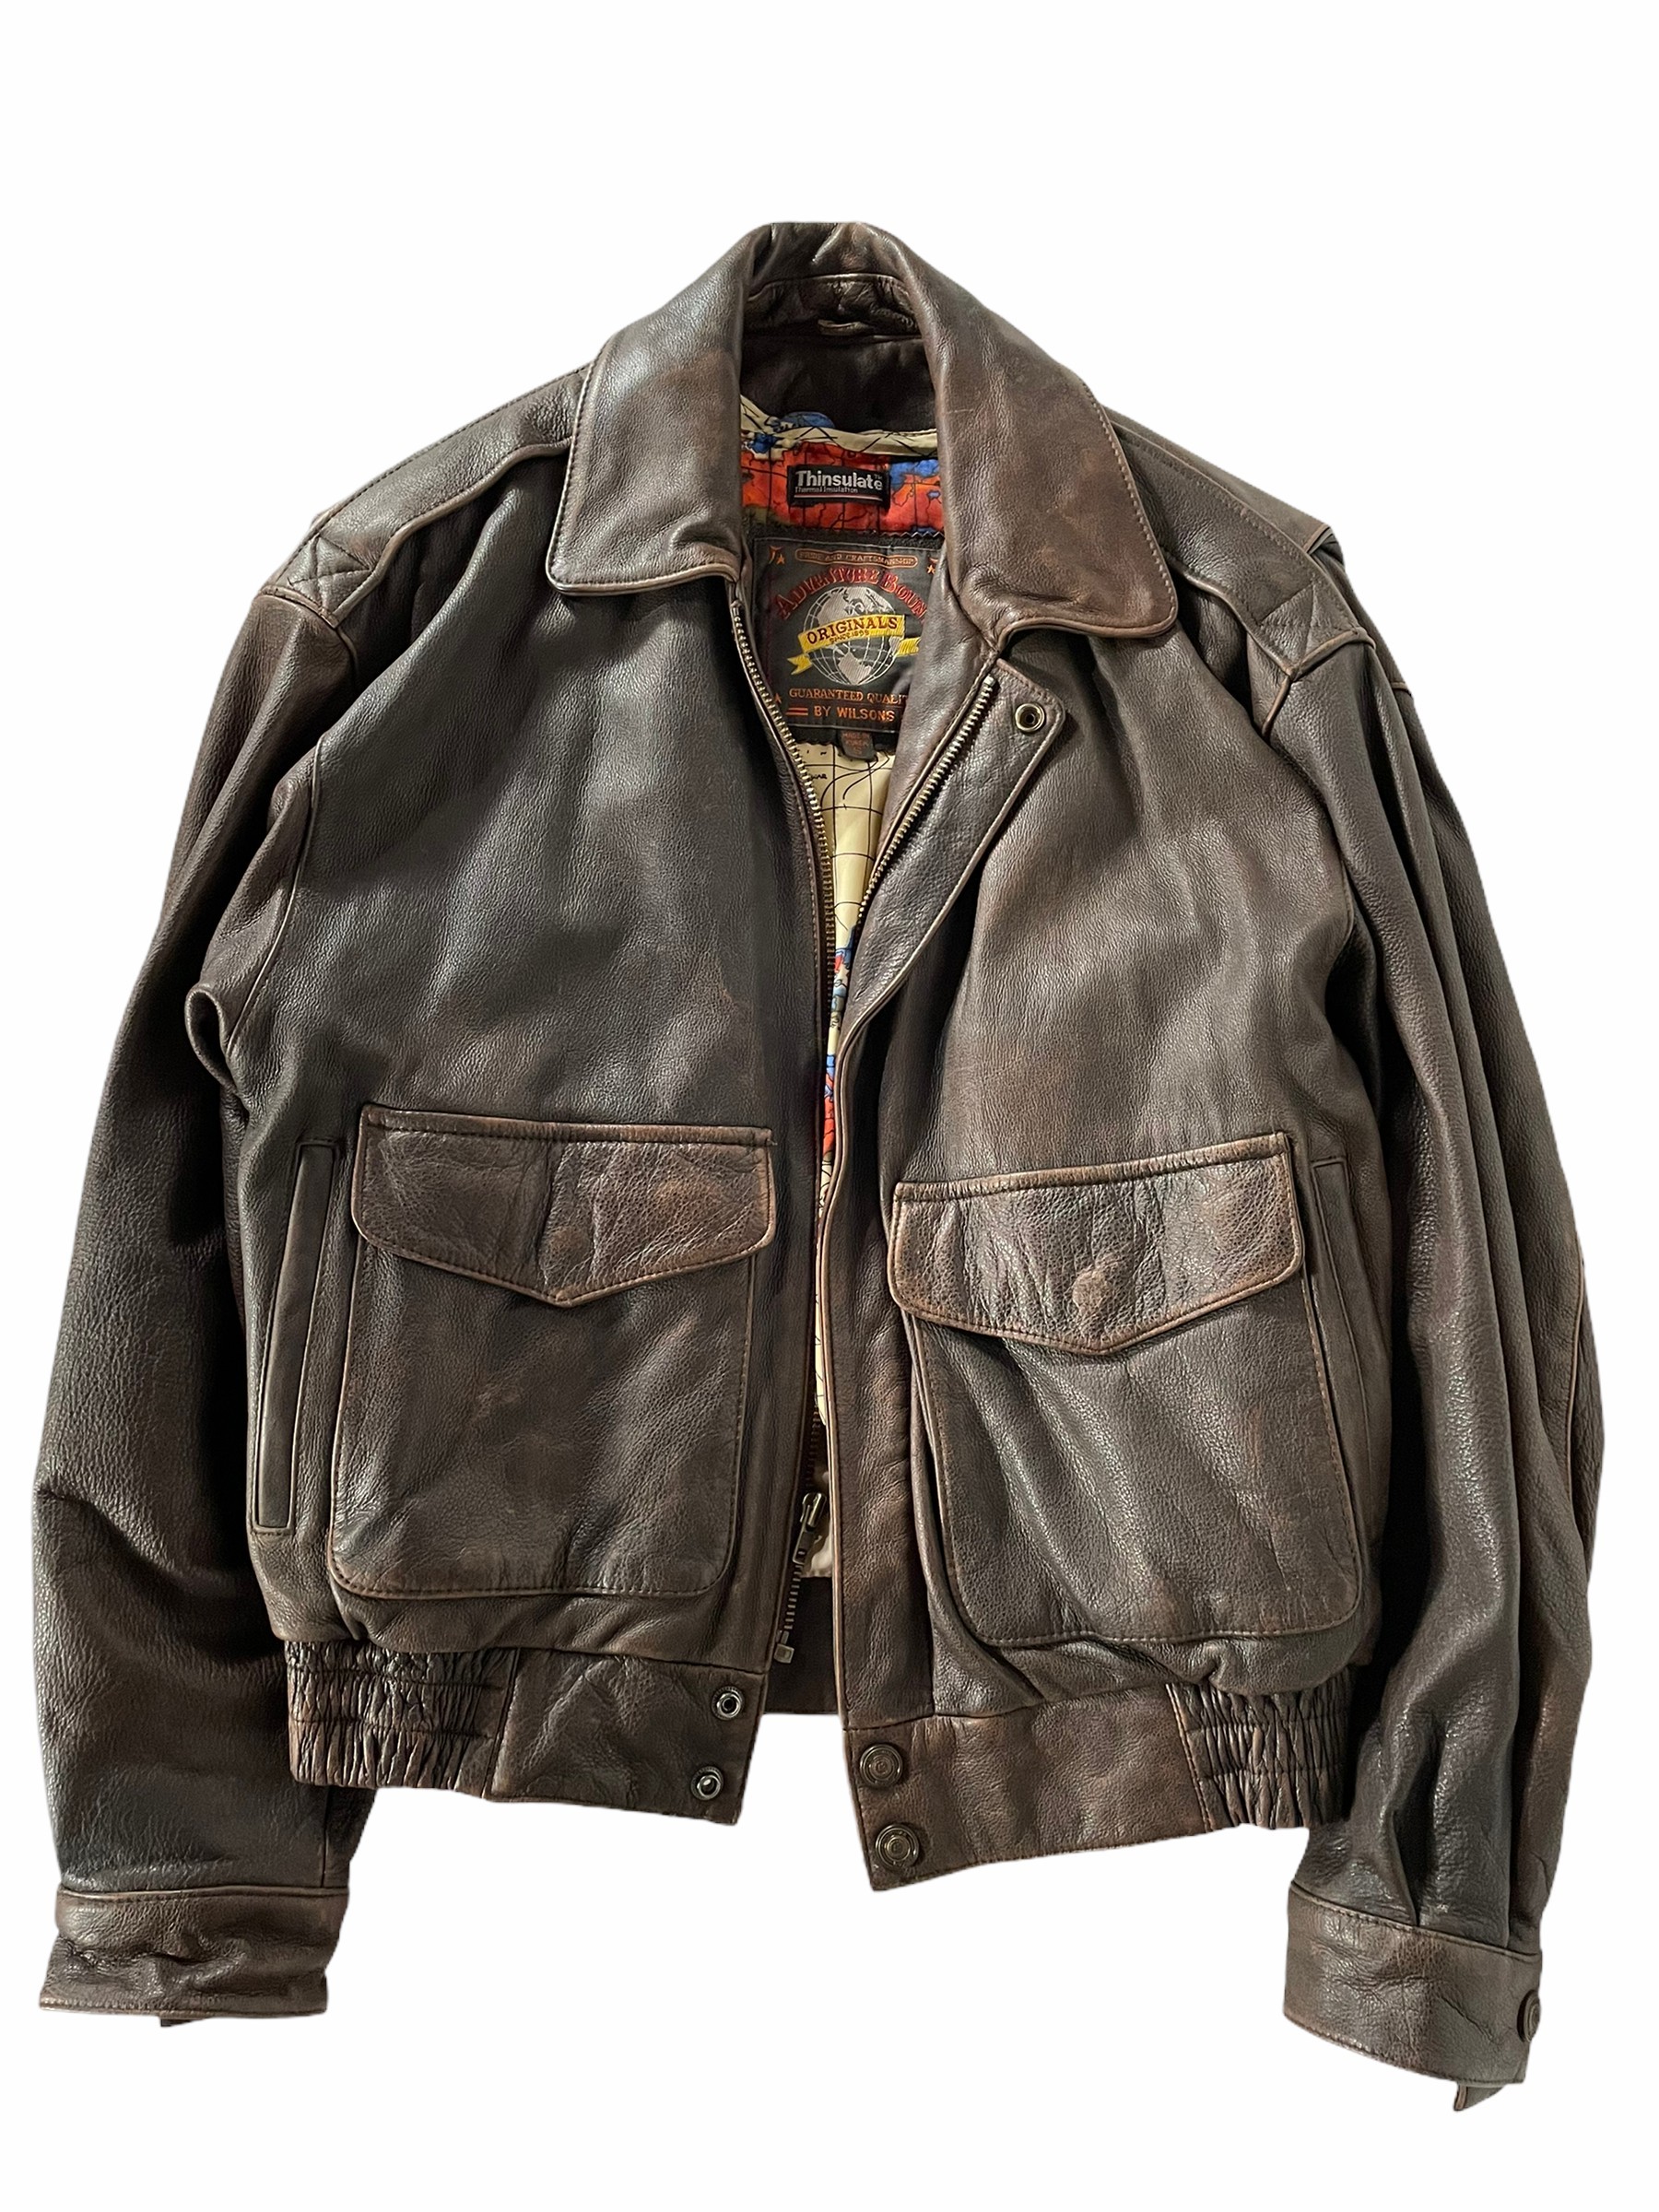 Wilsons Leather - Heavy Leather Jacket - 1